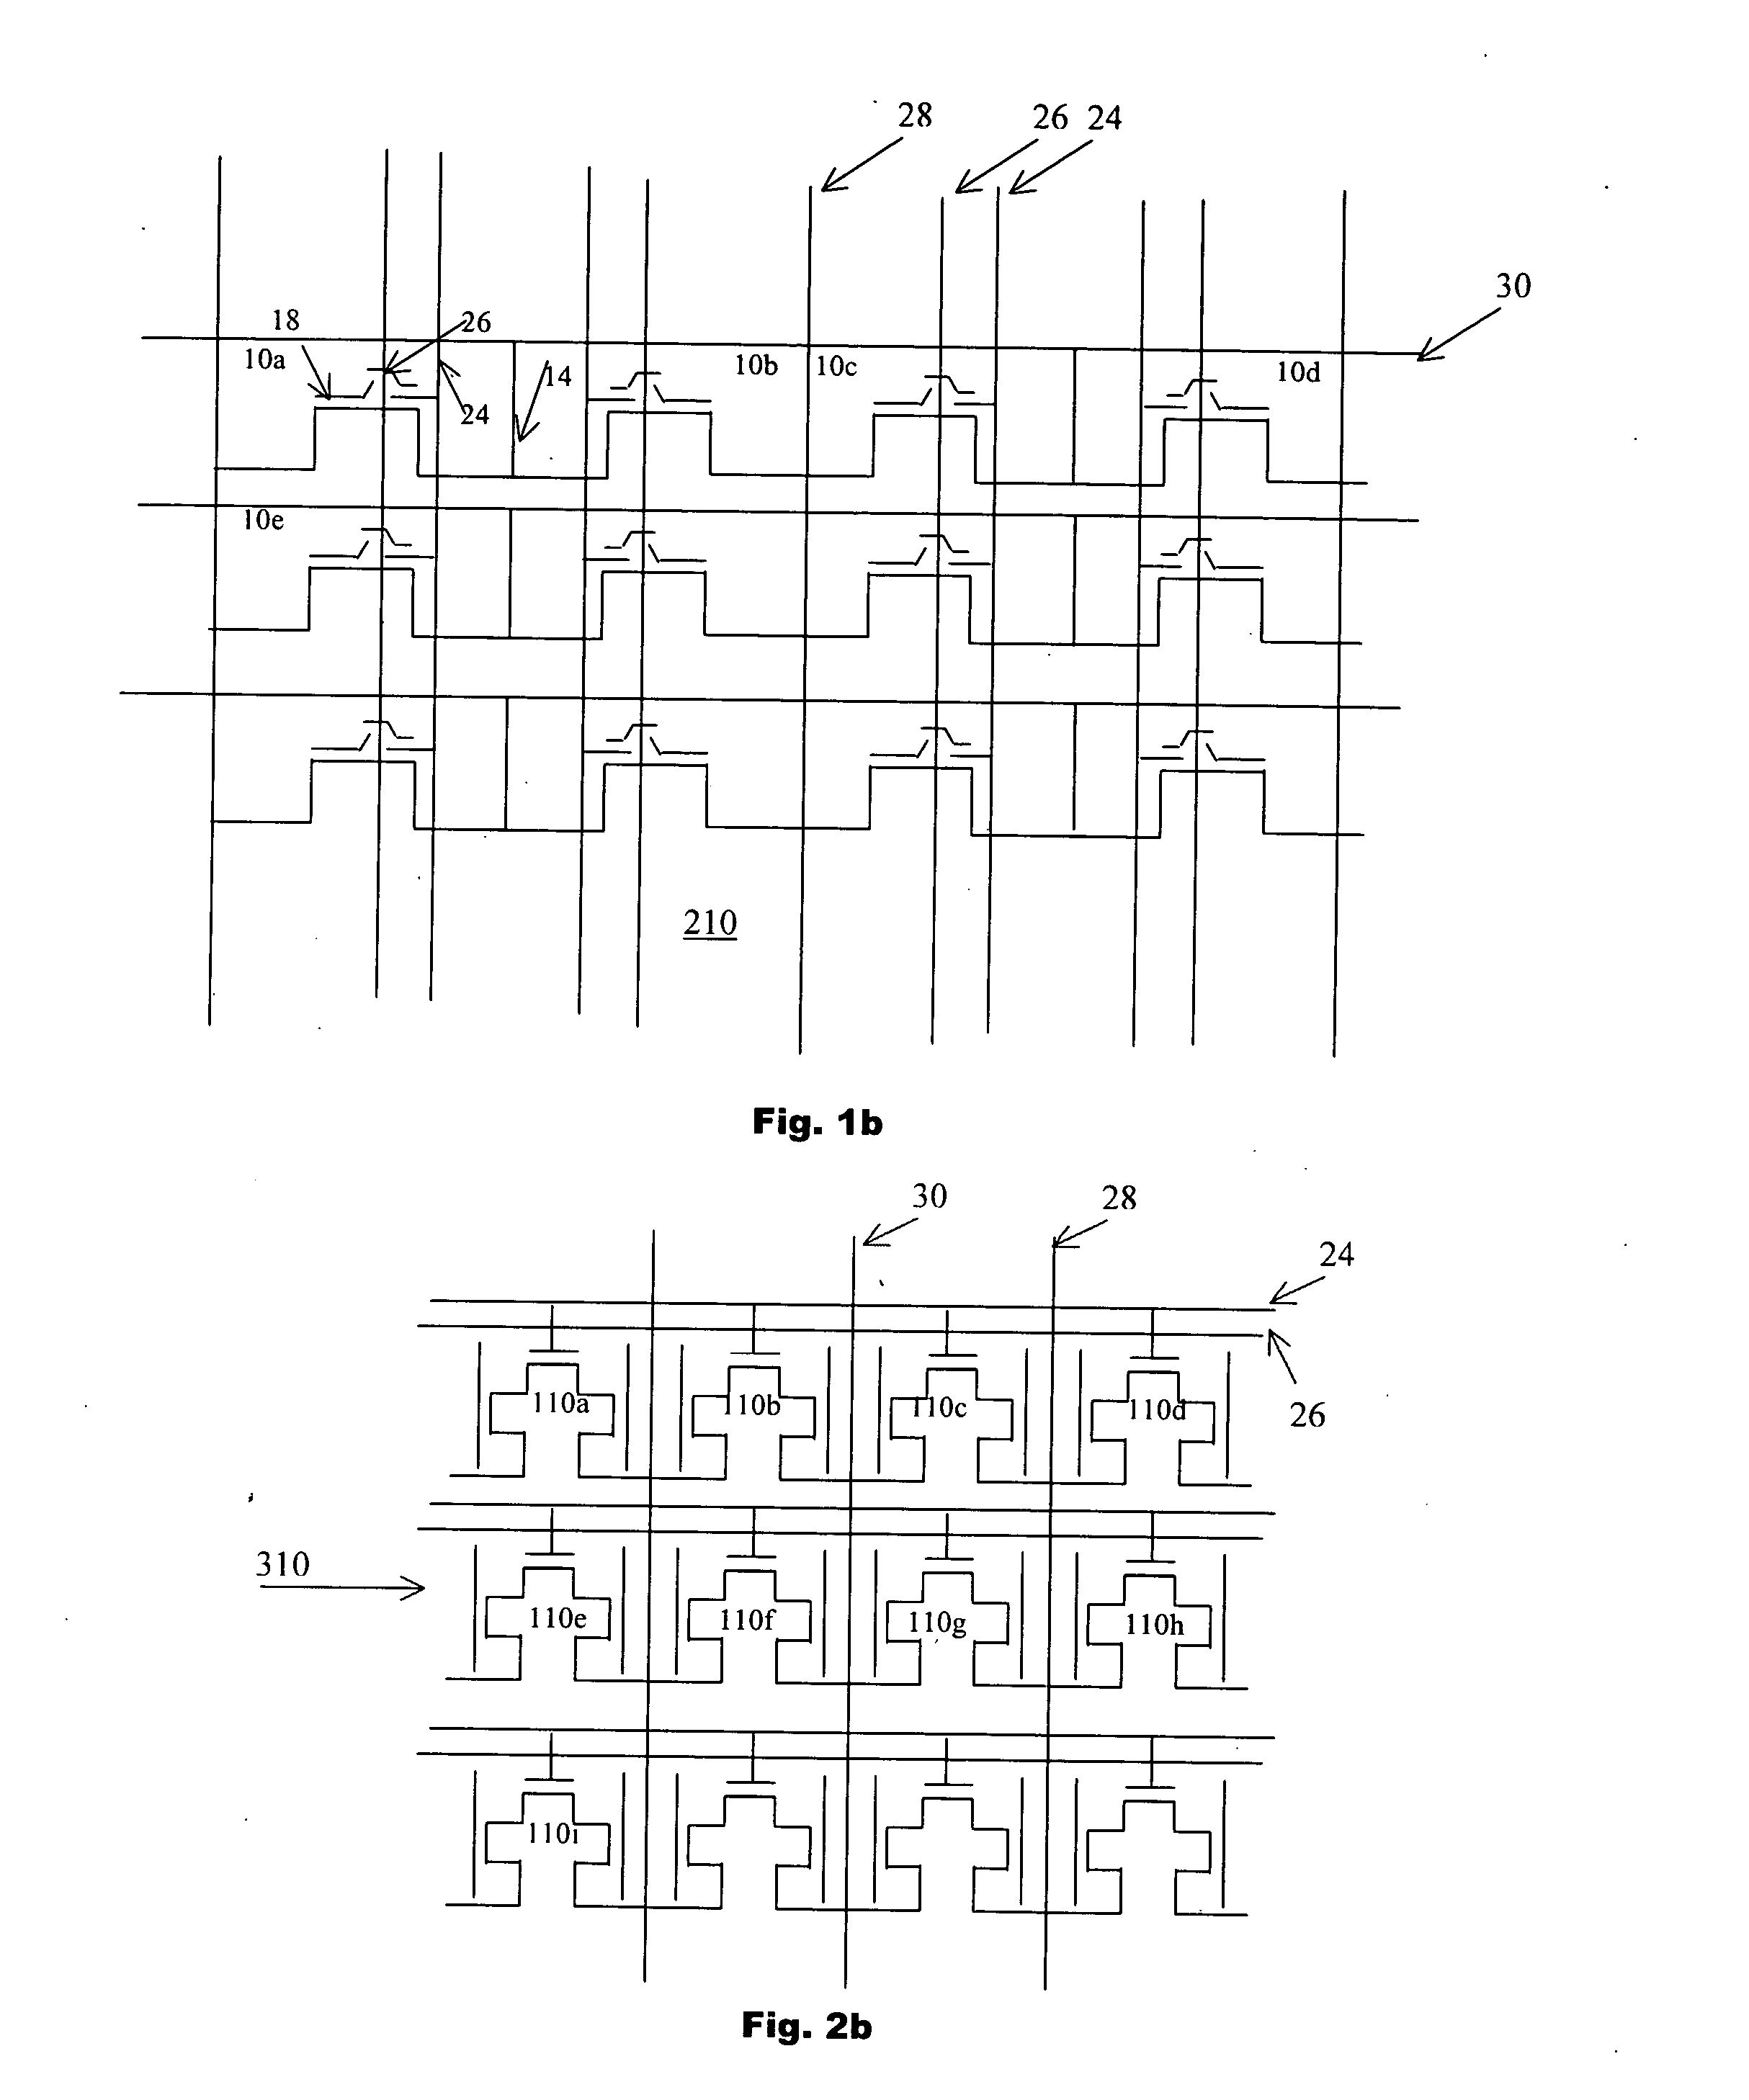 Nonvolatile memory cell having floating gate, control gate and separate erase gate, an array of such memory cells, and method of manufacturing